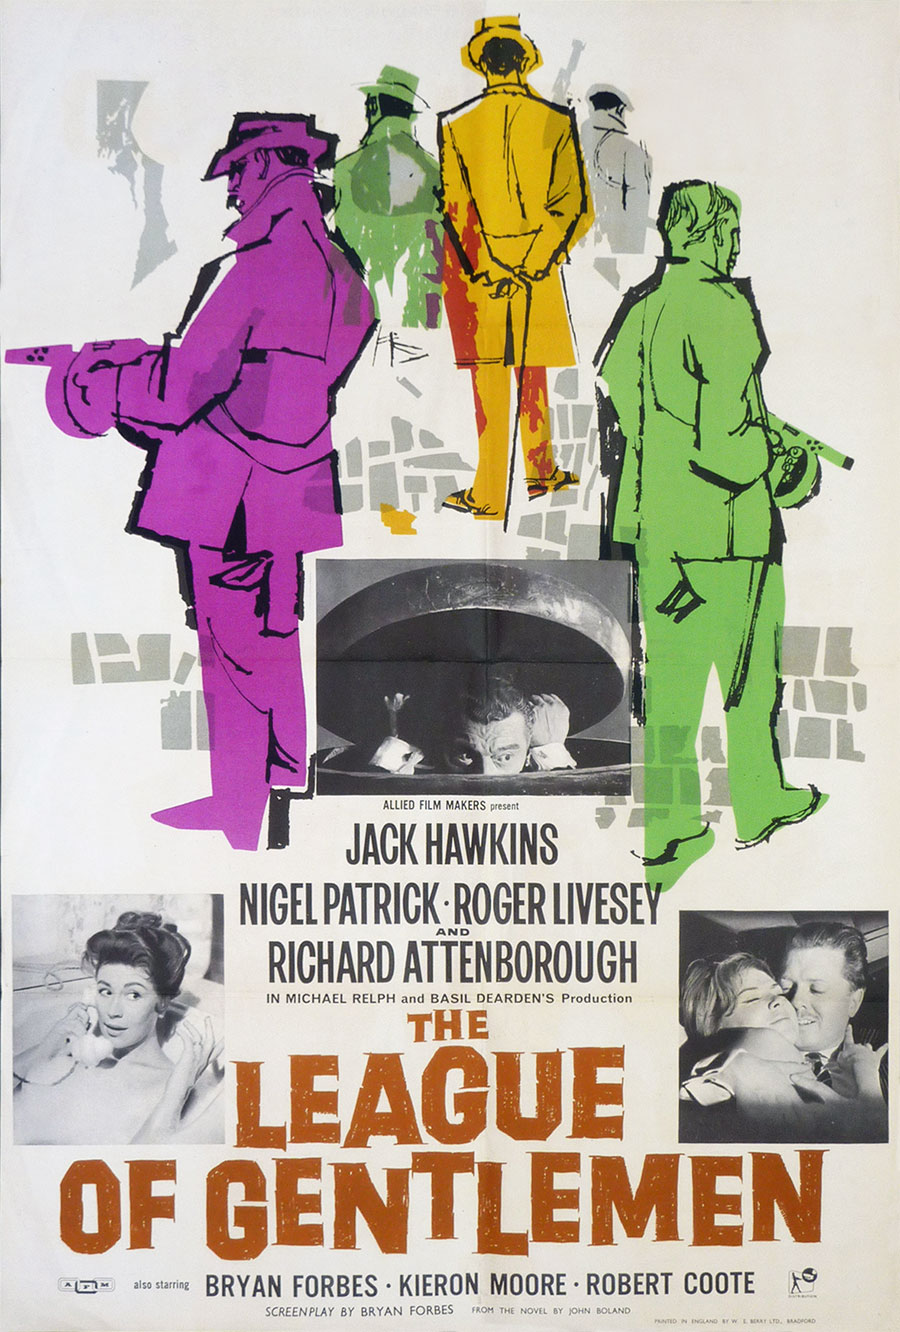 Poster for the 1960 film The League of Gentlemen